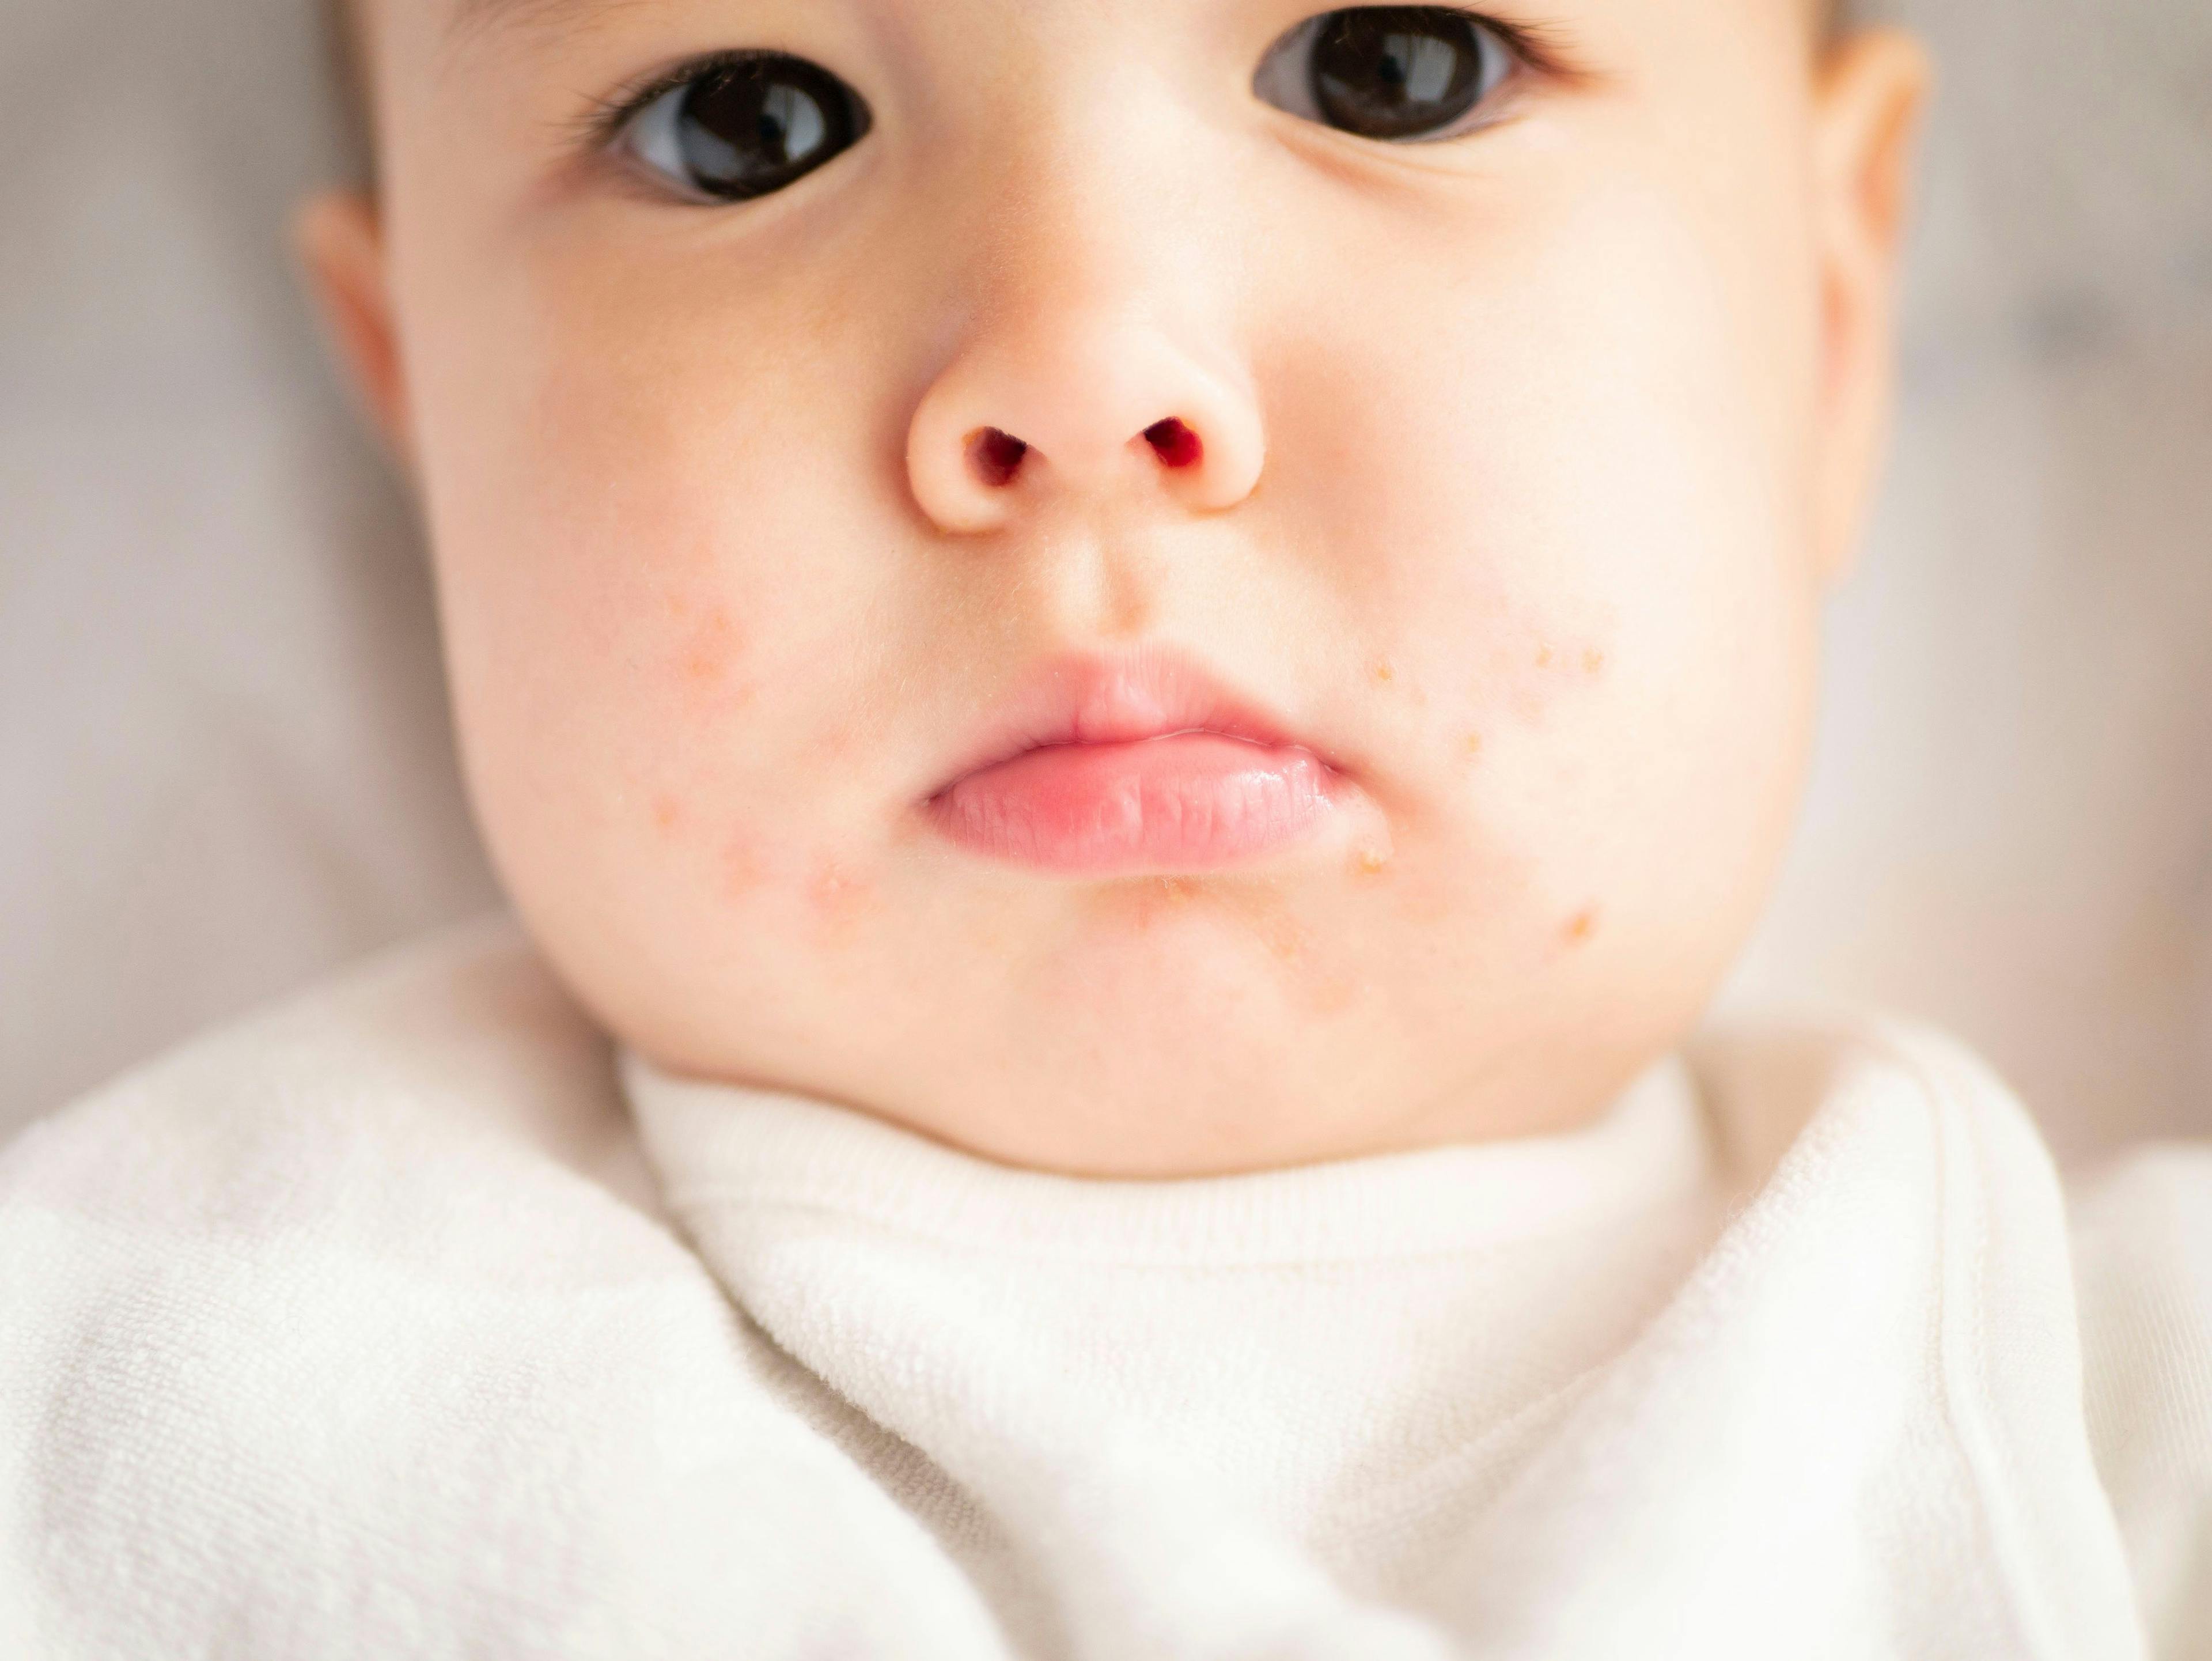 Pediatric Dermatology Cases: What's the Diagnosis?